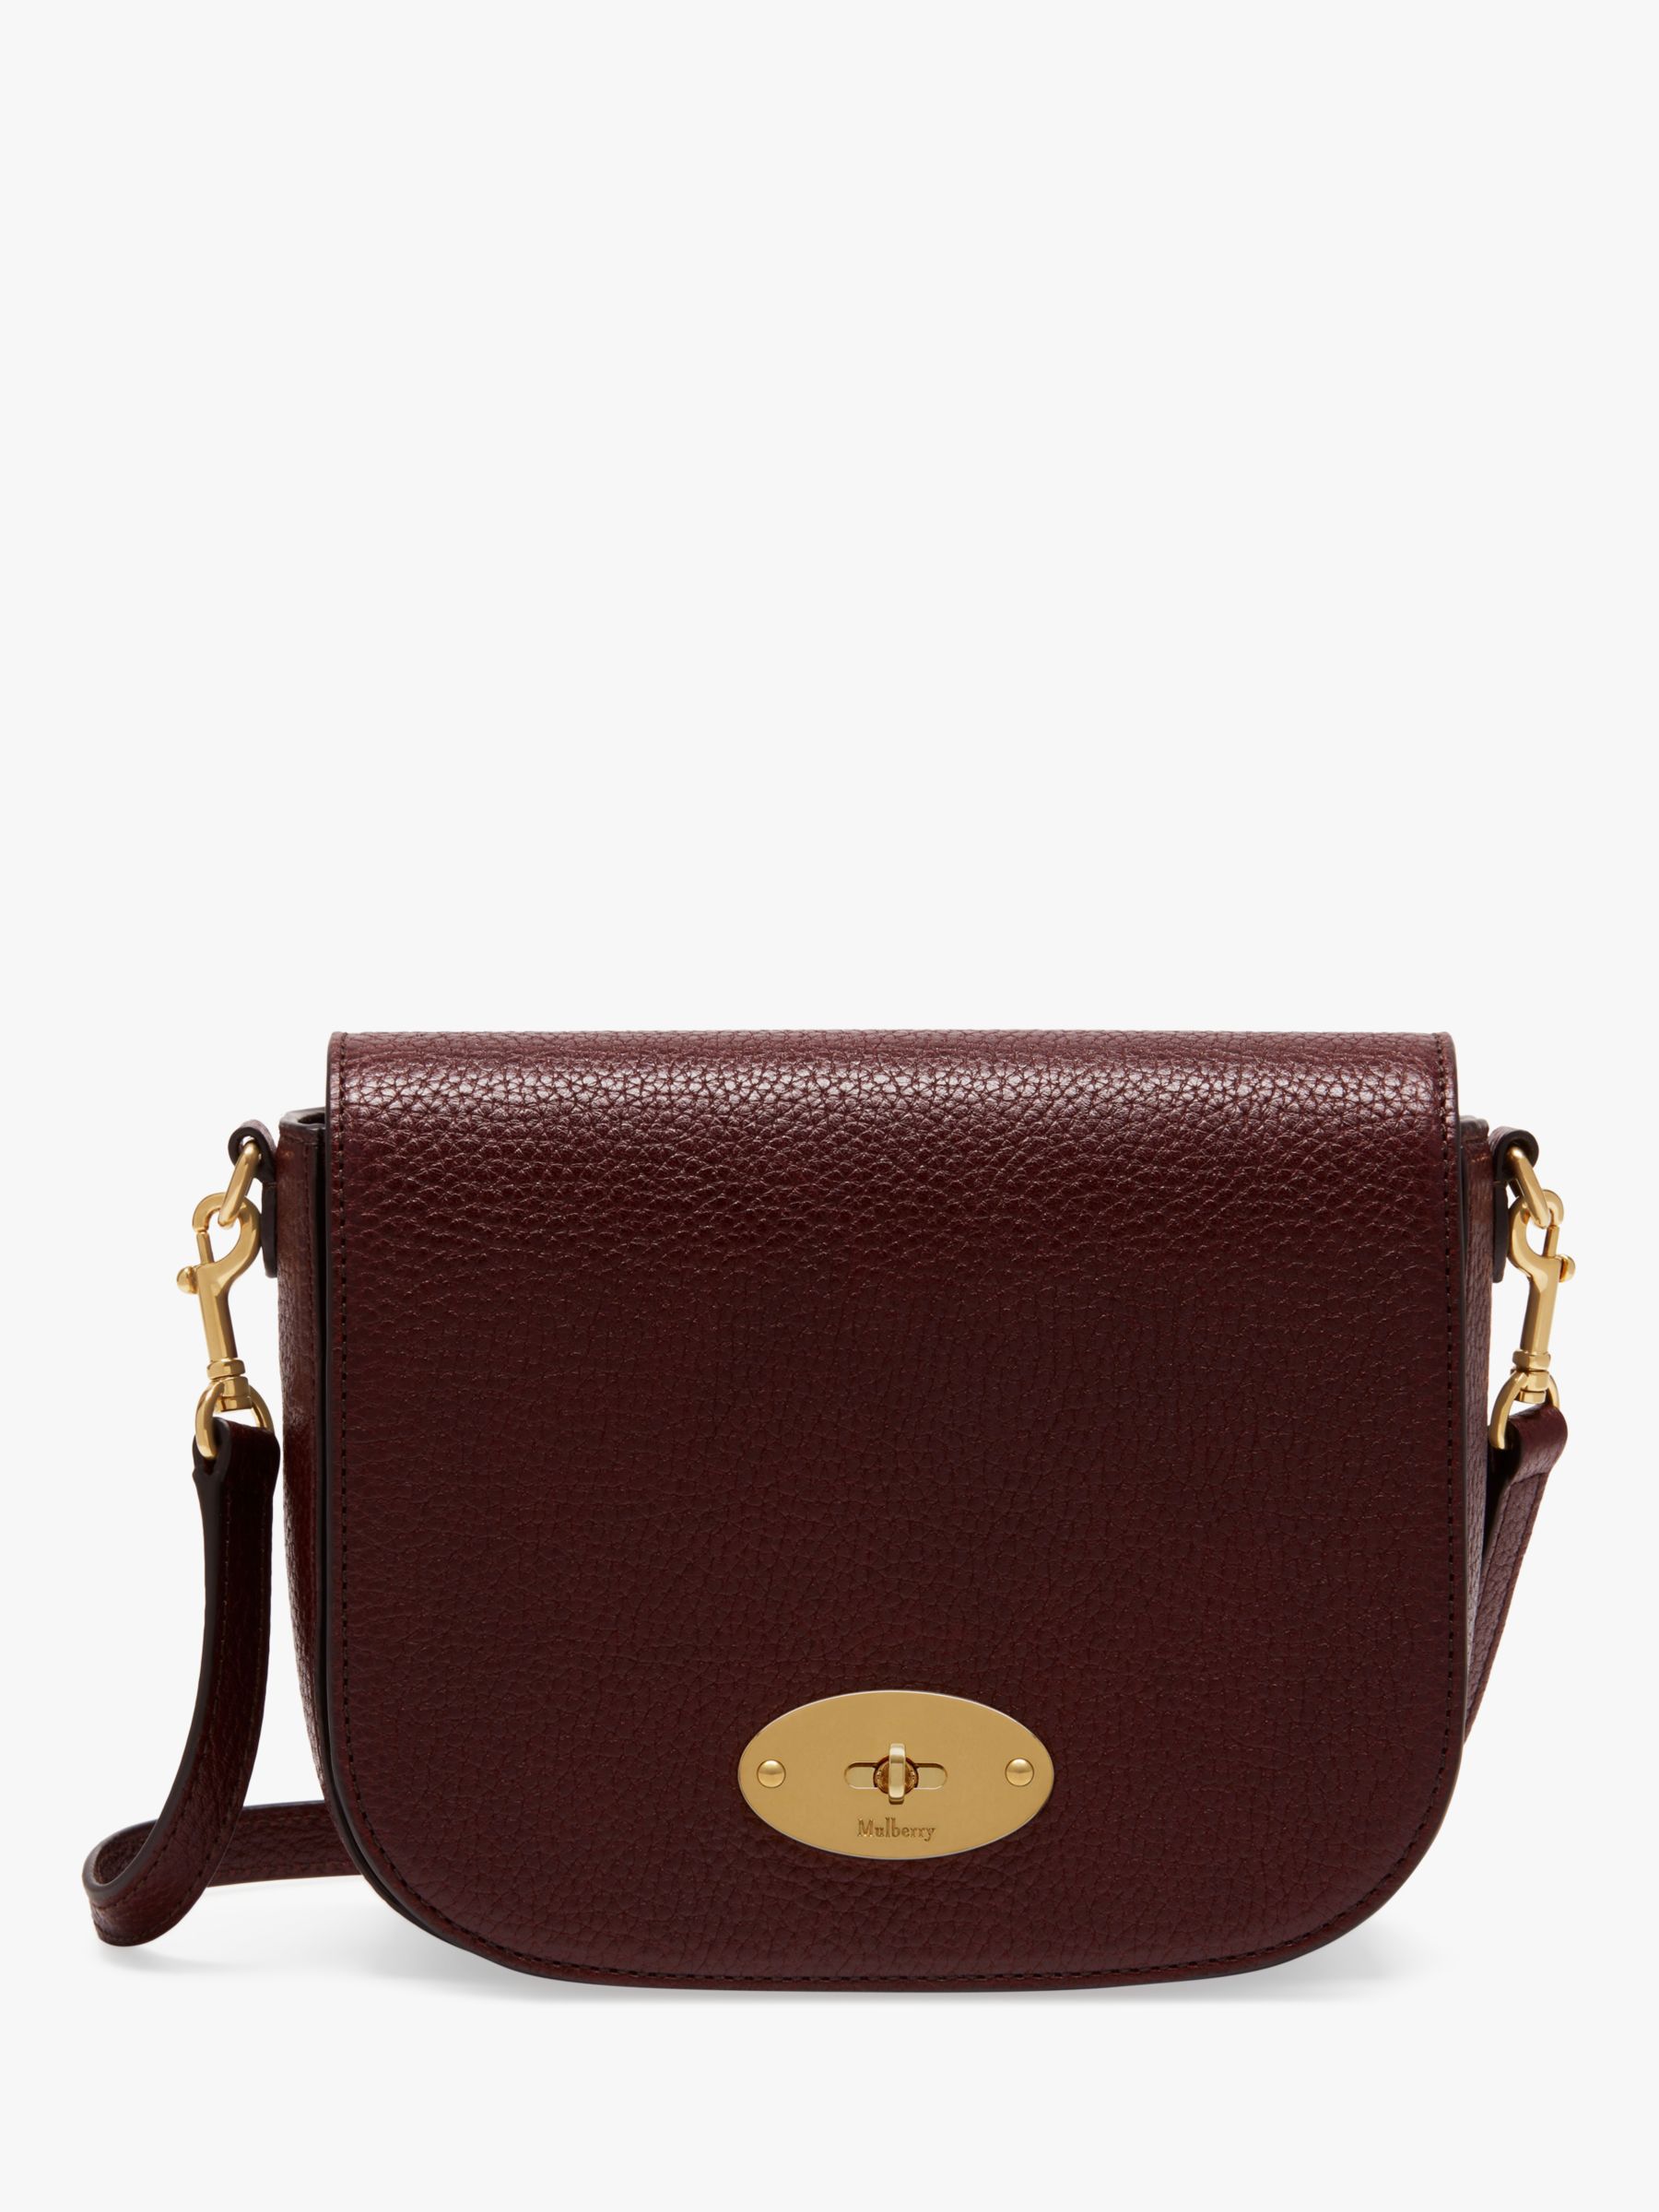 Mulberry Small Darley Grain Veg Tanned Leather Satchel Bag, Oxblood